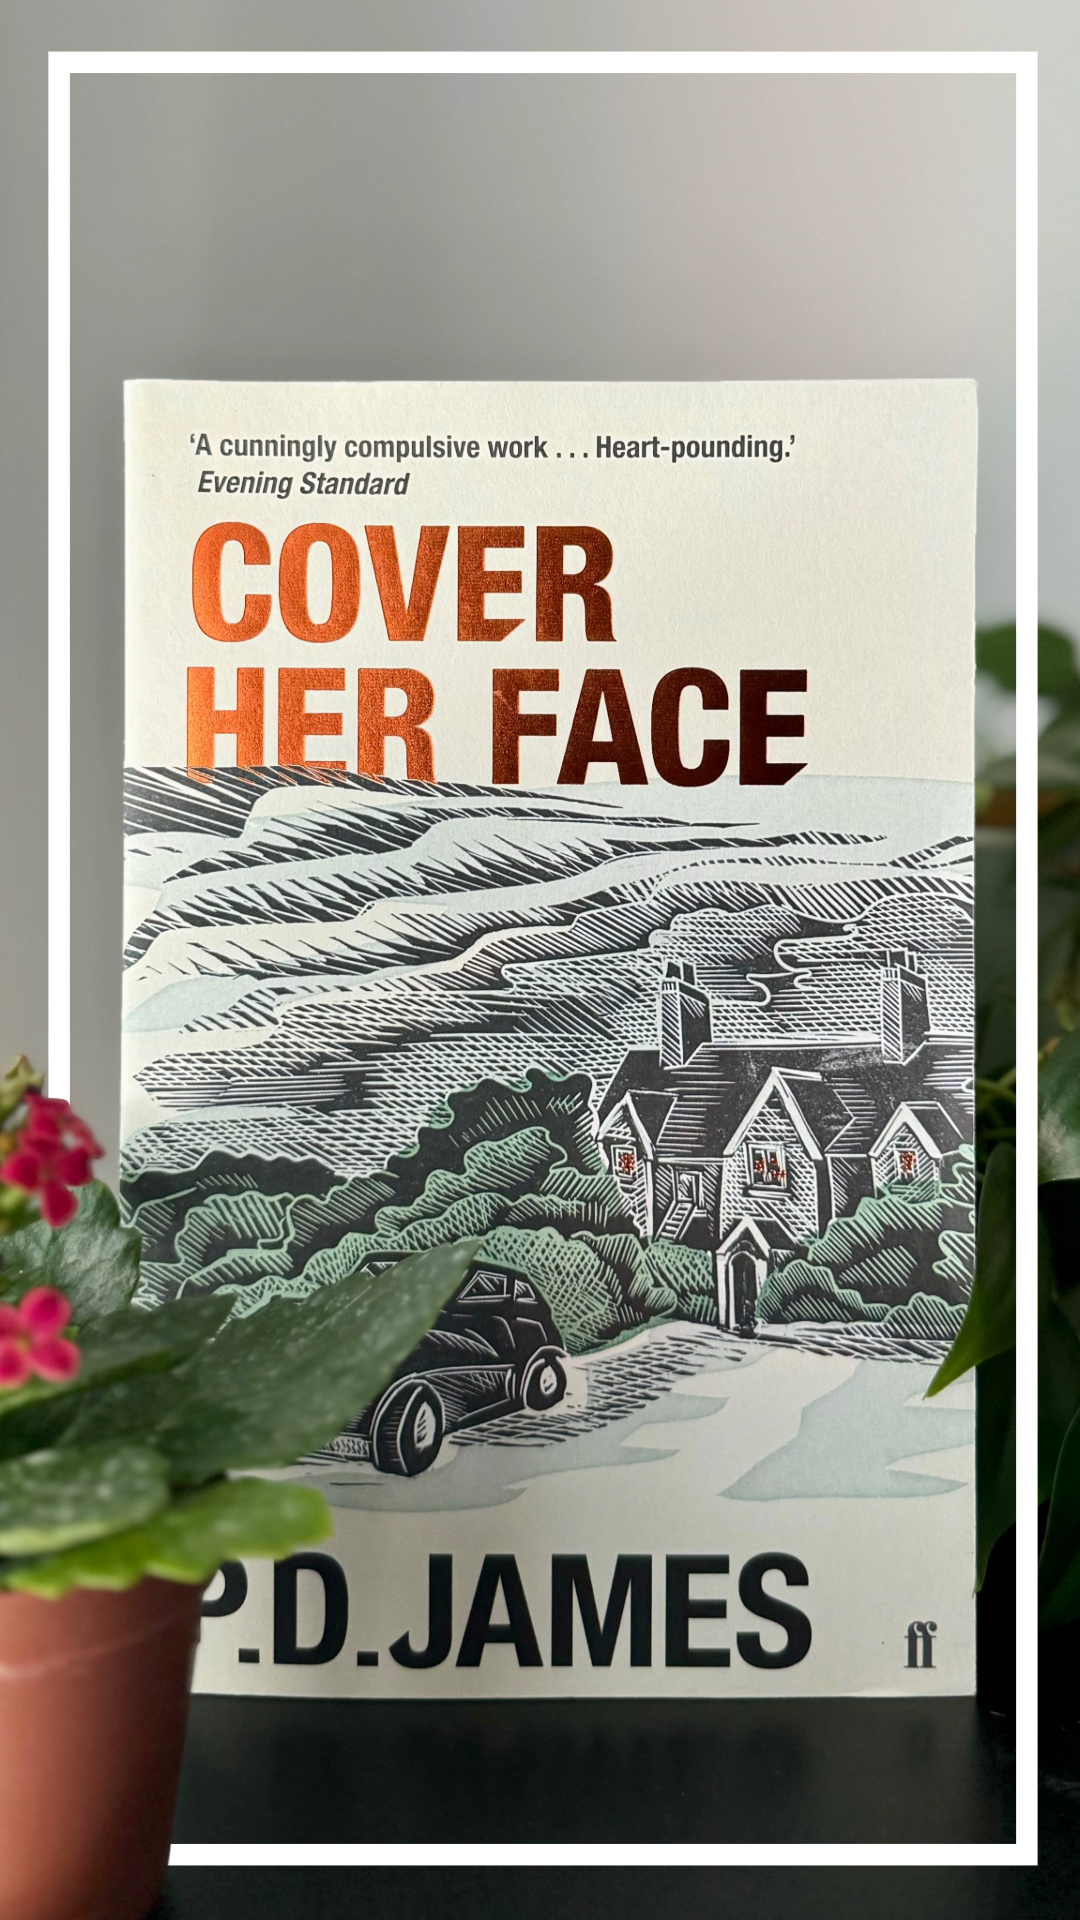 Modern(ish) mystery: First impressions of Cover Her Face